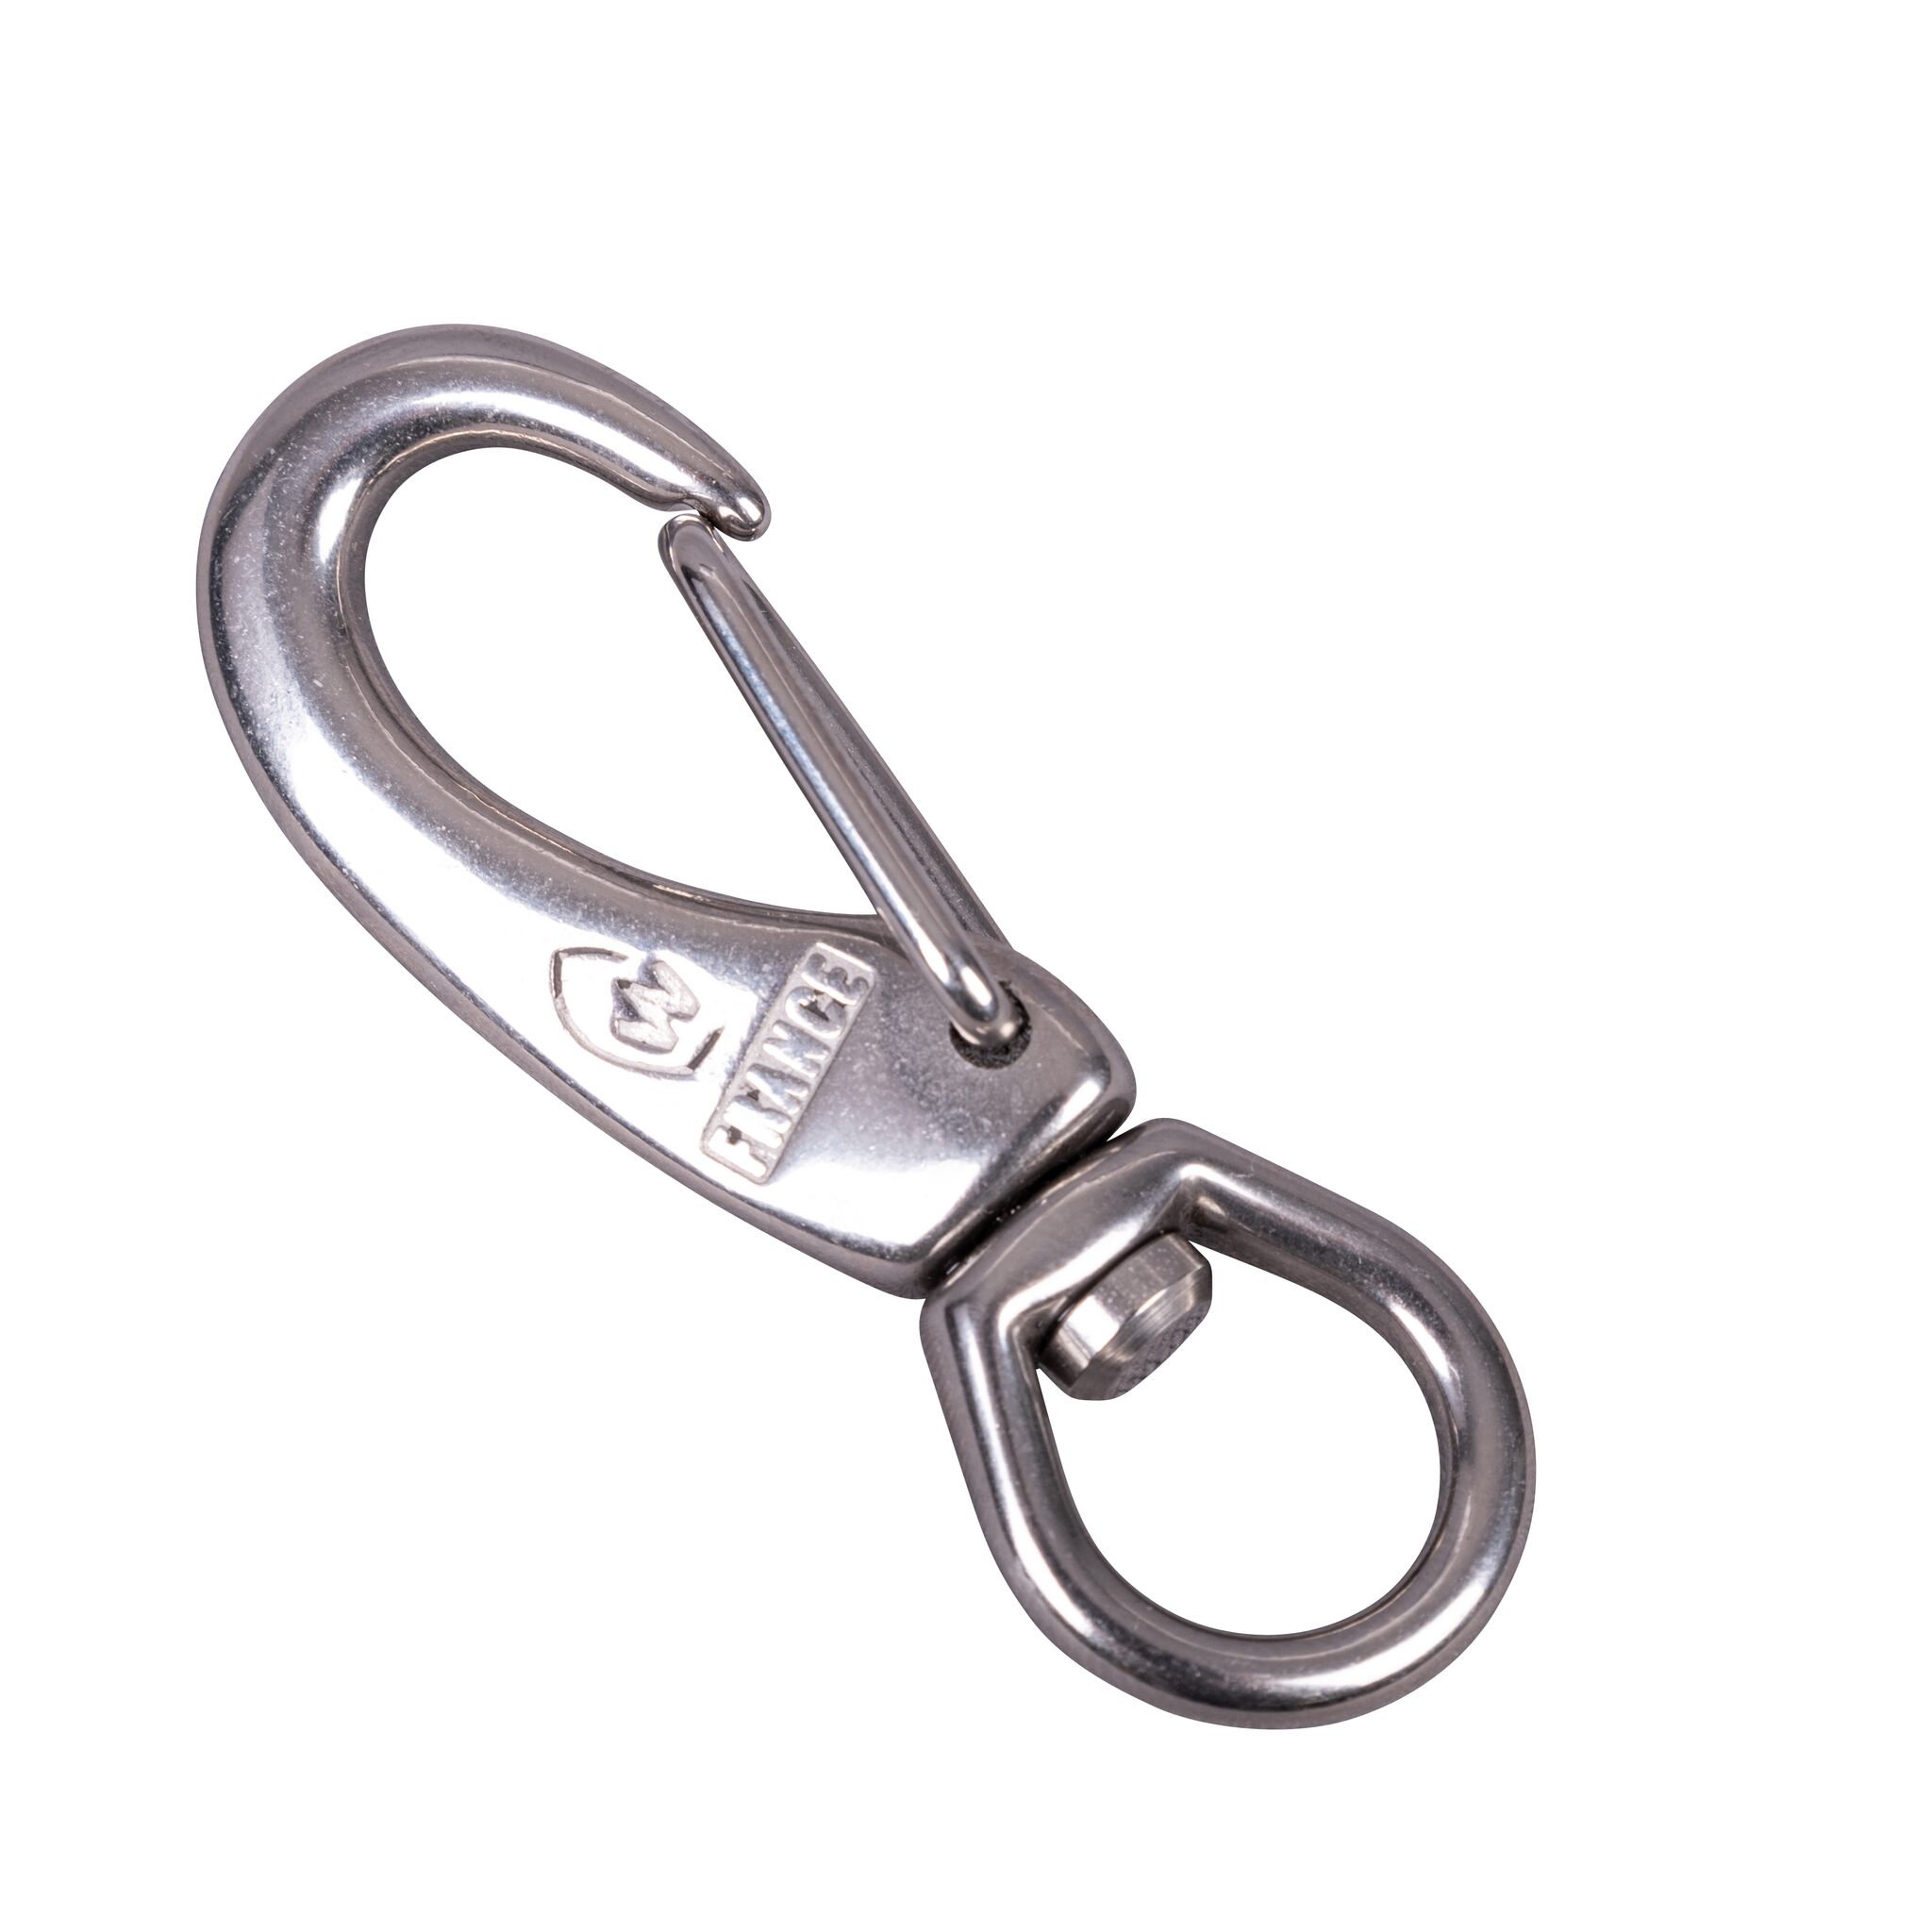 Snap hook with swivel